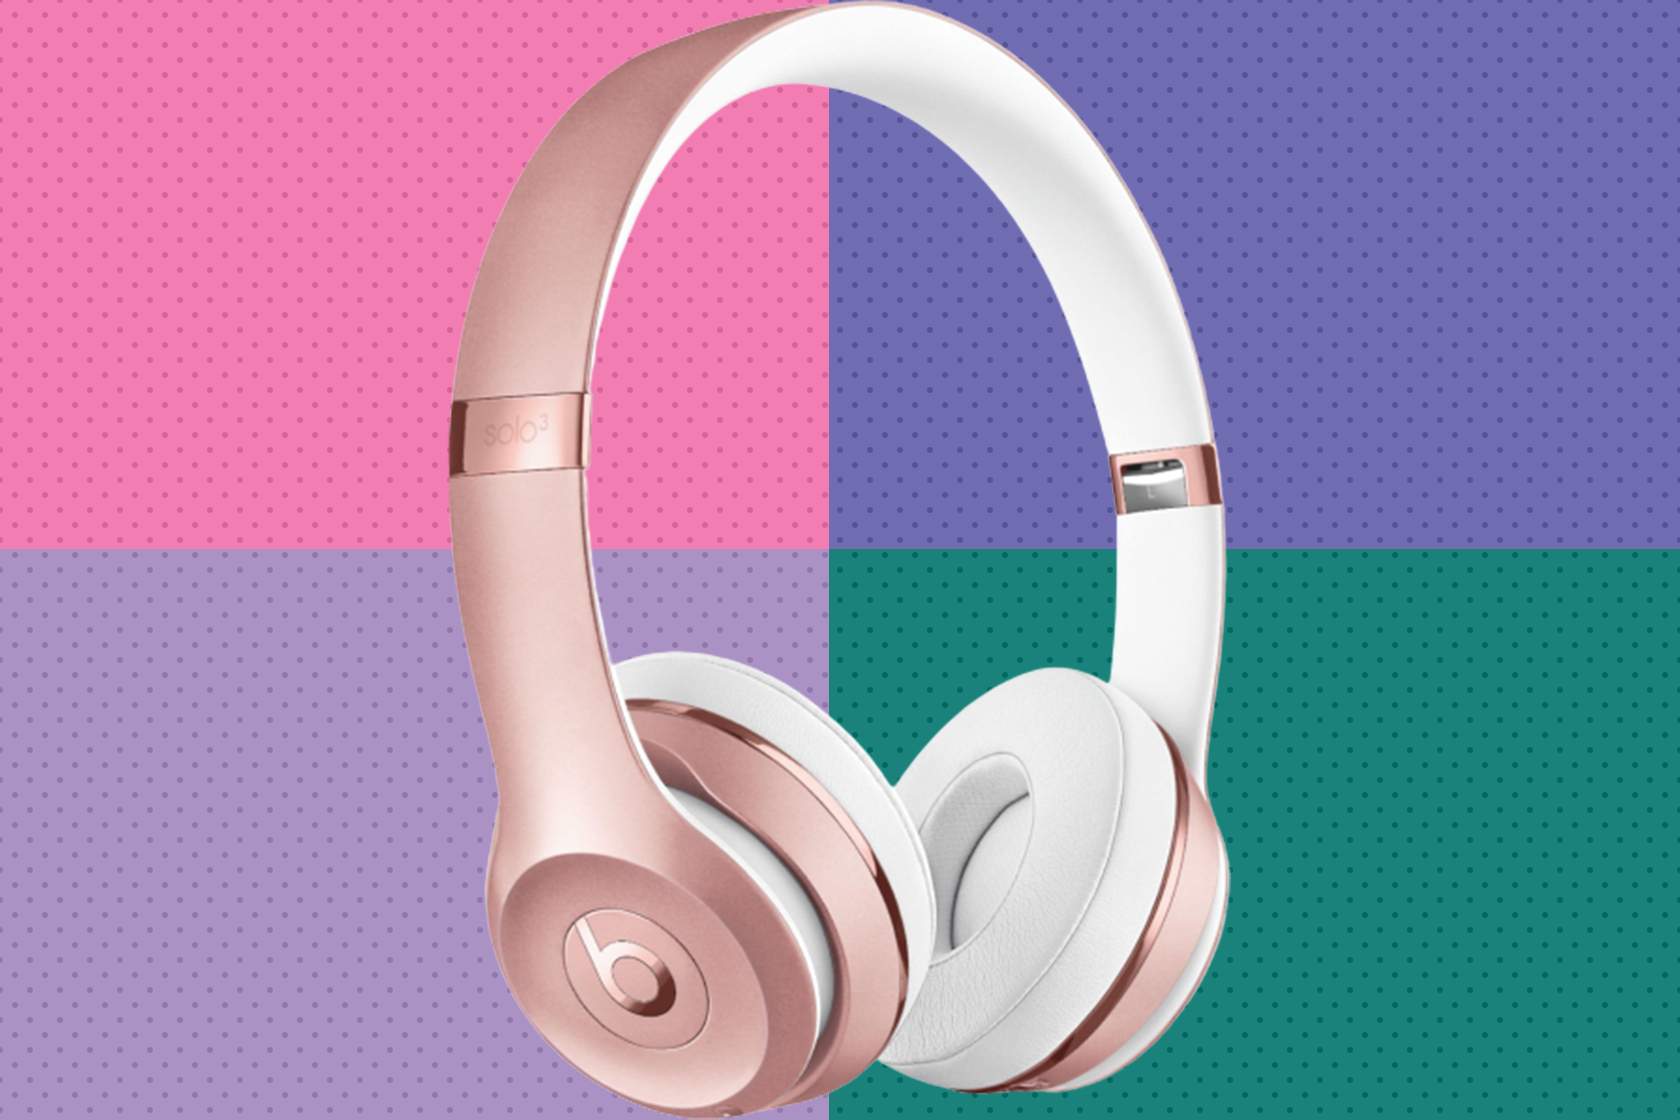 Drejning knap Frivillig Save $60 on a pair of rose gold Beats Solo 3 wireless headphones